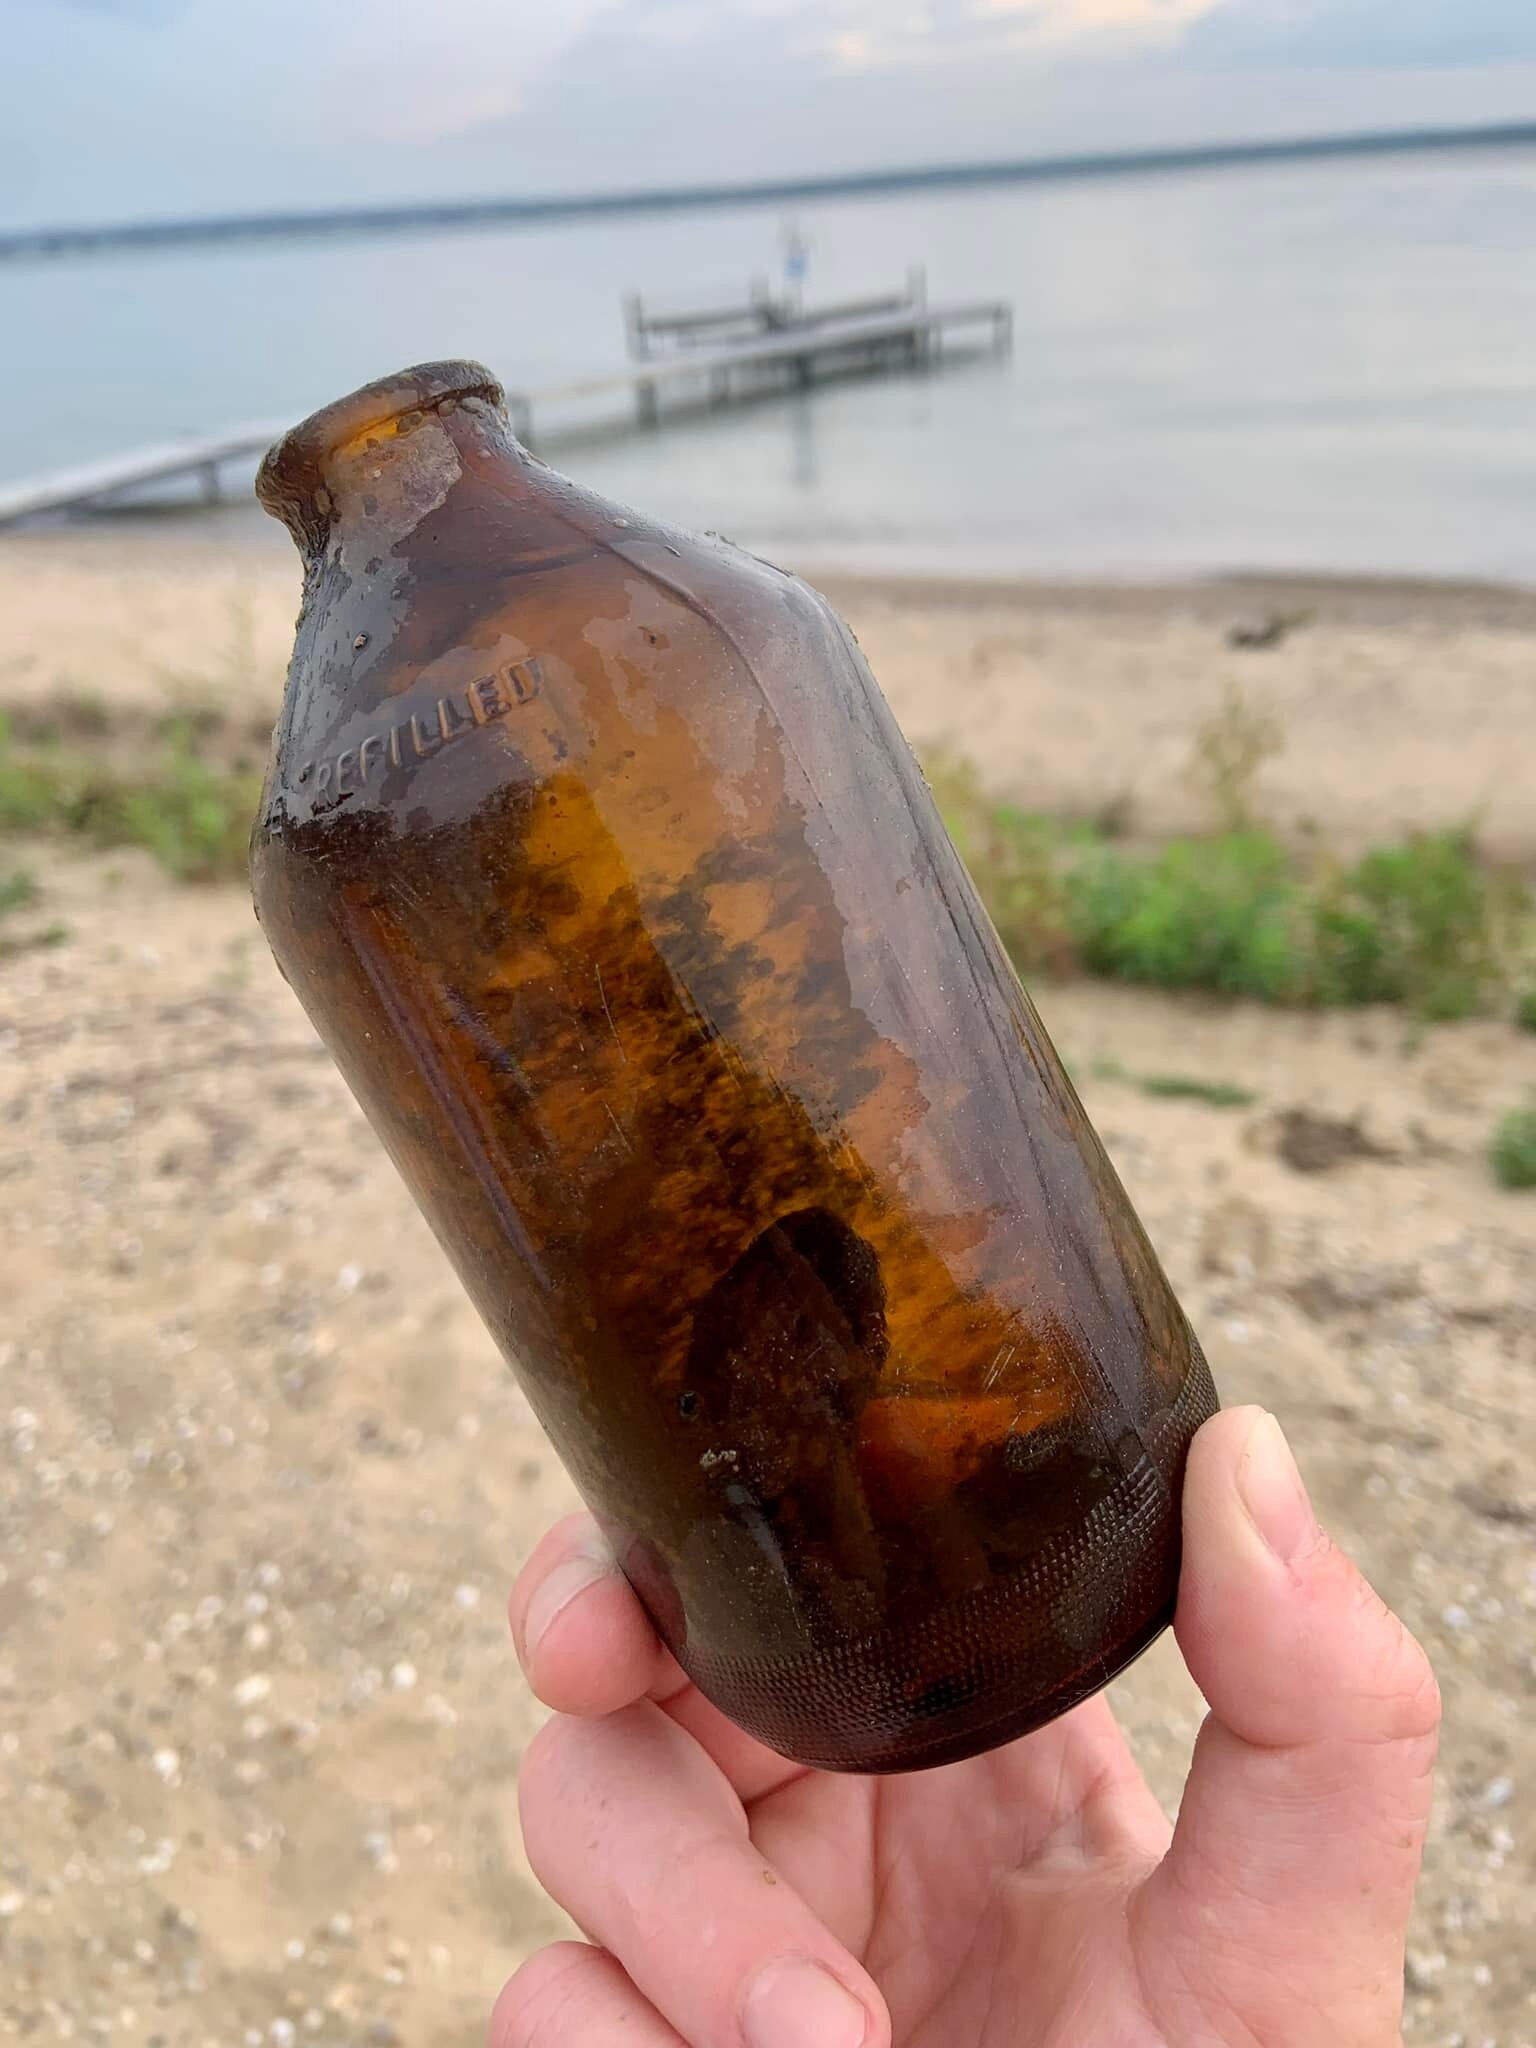 We were picking trash up out of the lake and when we took a closer look at one of the bottles we noticed someone was using it to take a nap! 
Don&rsquo;t worry, we returned Mr. Goby to his fresh water home and recycled the bottle as a flower vase❤️

